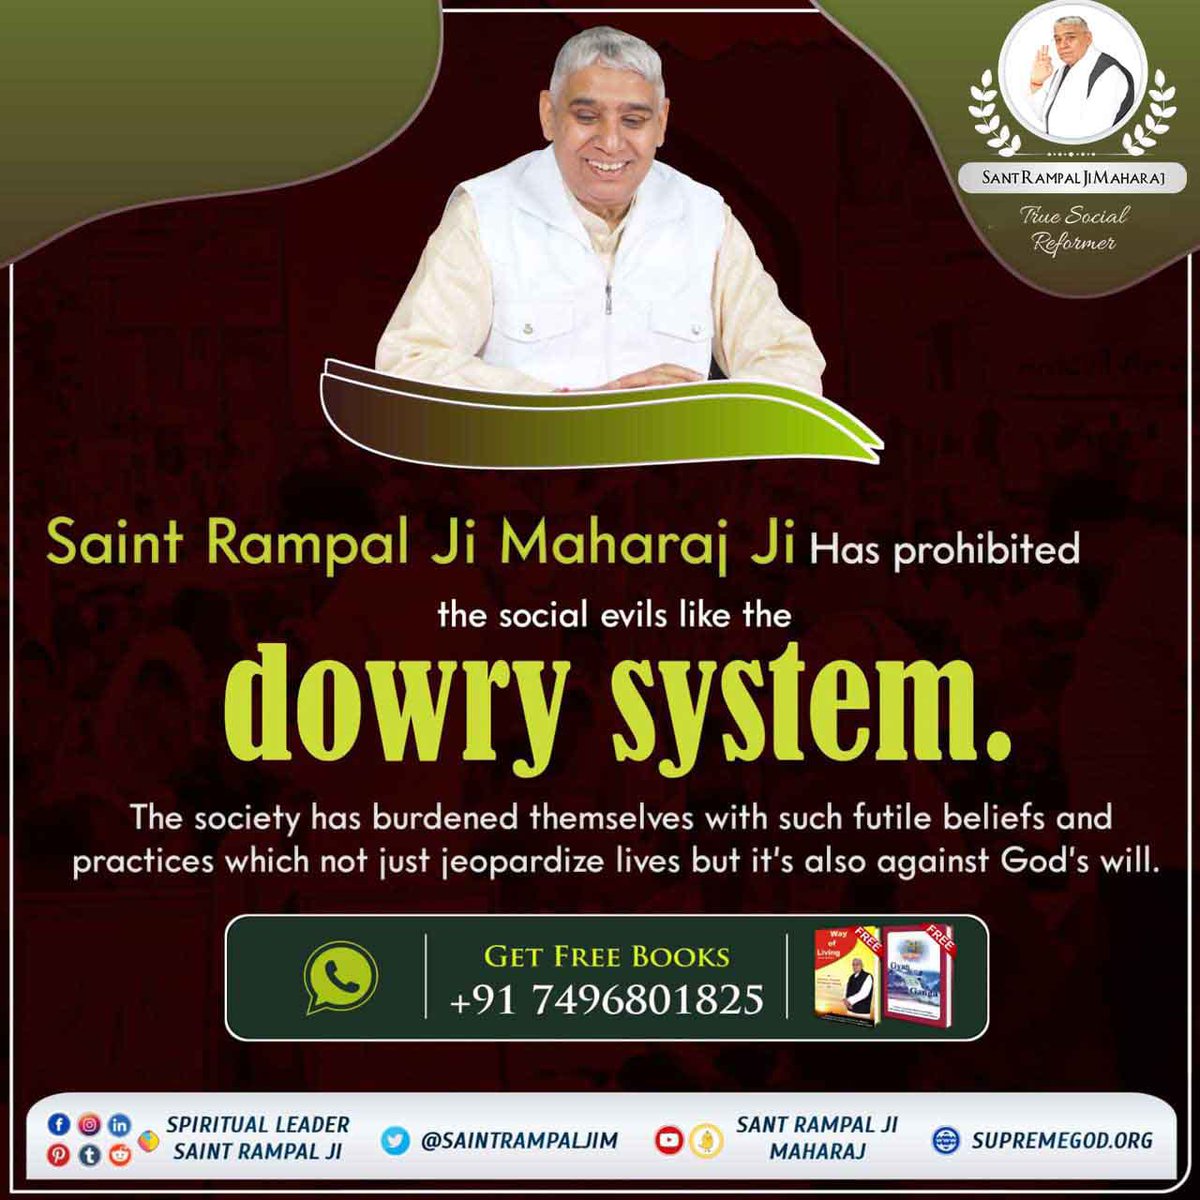 Saint Rampal Ji Maharaj Ji
Has prohibited
the social evils like the 
dowry system.
The society has burdened themselves with such futile beliefs and
practices which not just jeopardize lives but it's also against God's will.
#GodNightFriday
💁🏻📖To know, Download our Official App